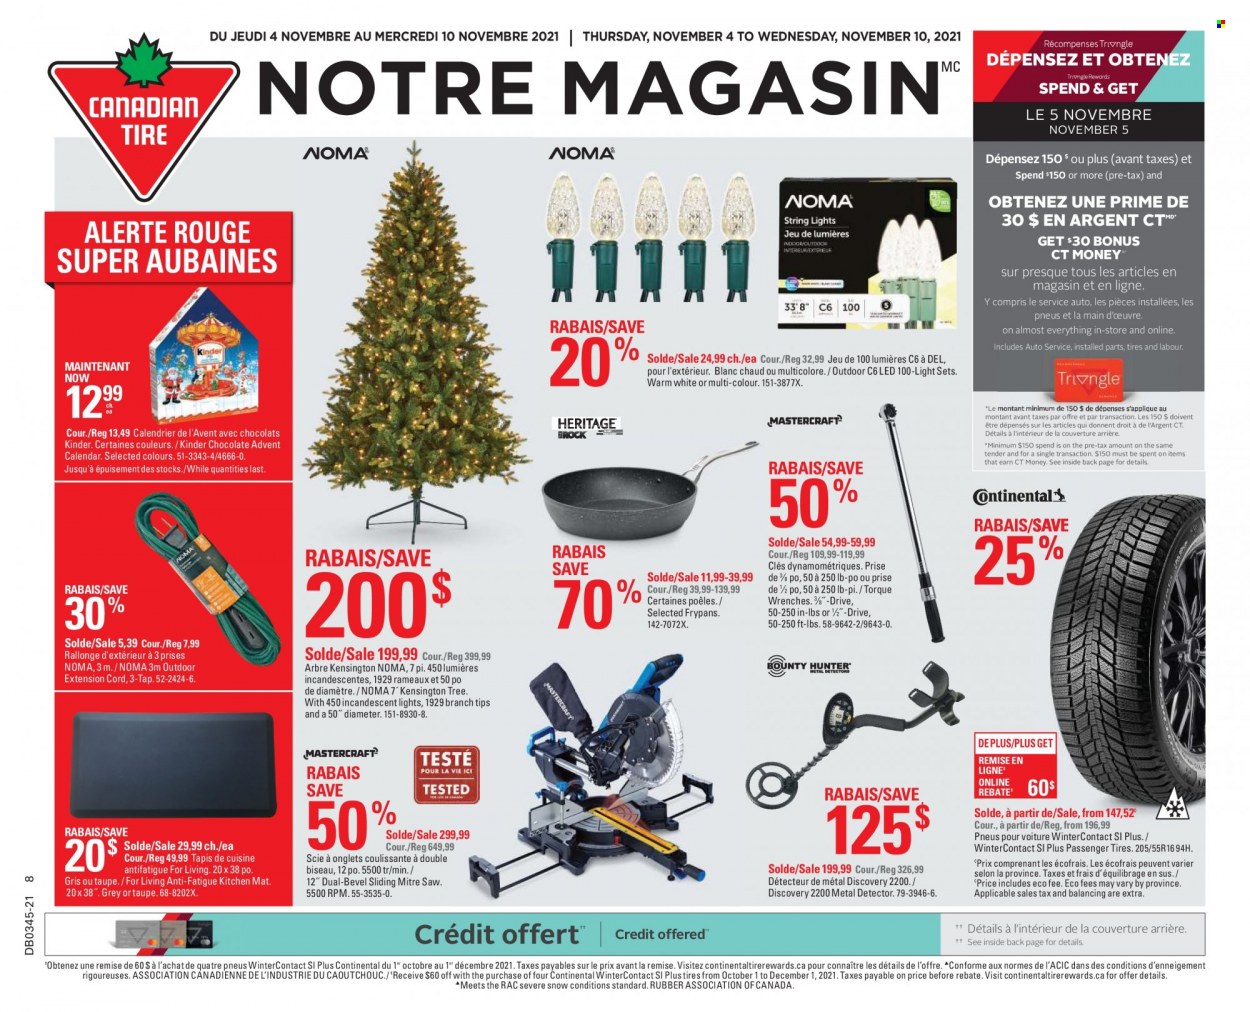 thumbnail - Canadian Tire Flyer - November 04, 2021 - November 10, 2021 - Sales products - Bounty, calendar, Hunter, light set, string lights, kitchen mat, saw, torque wrench, extension cord, Continental, tires. Page 1.